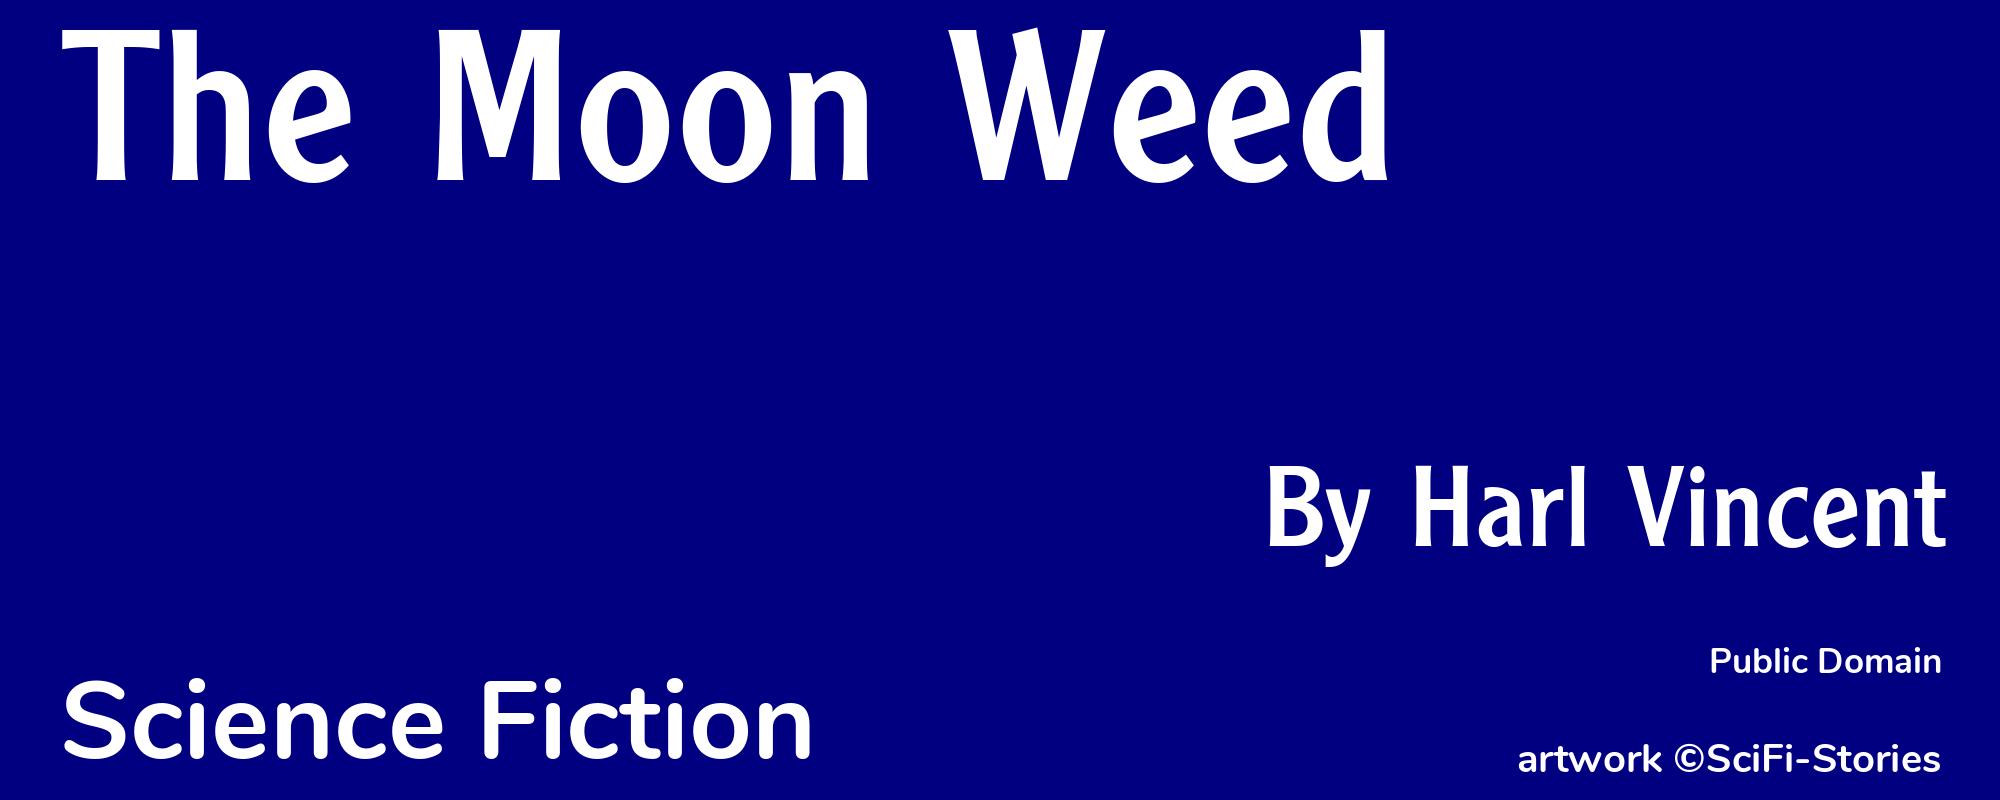 The Moon Weed - Cover